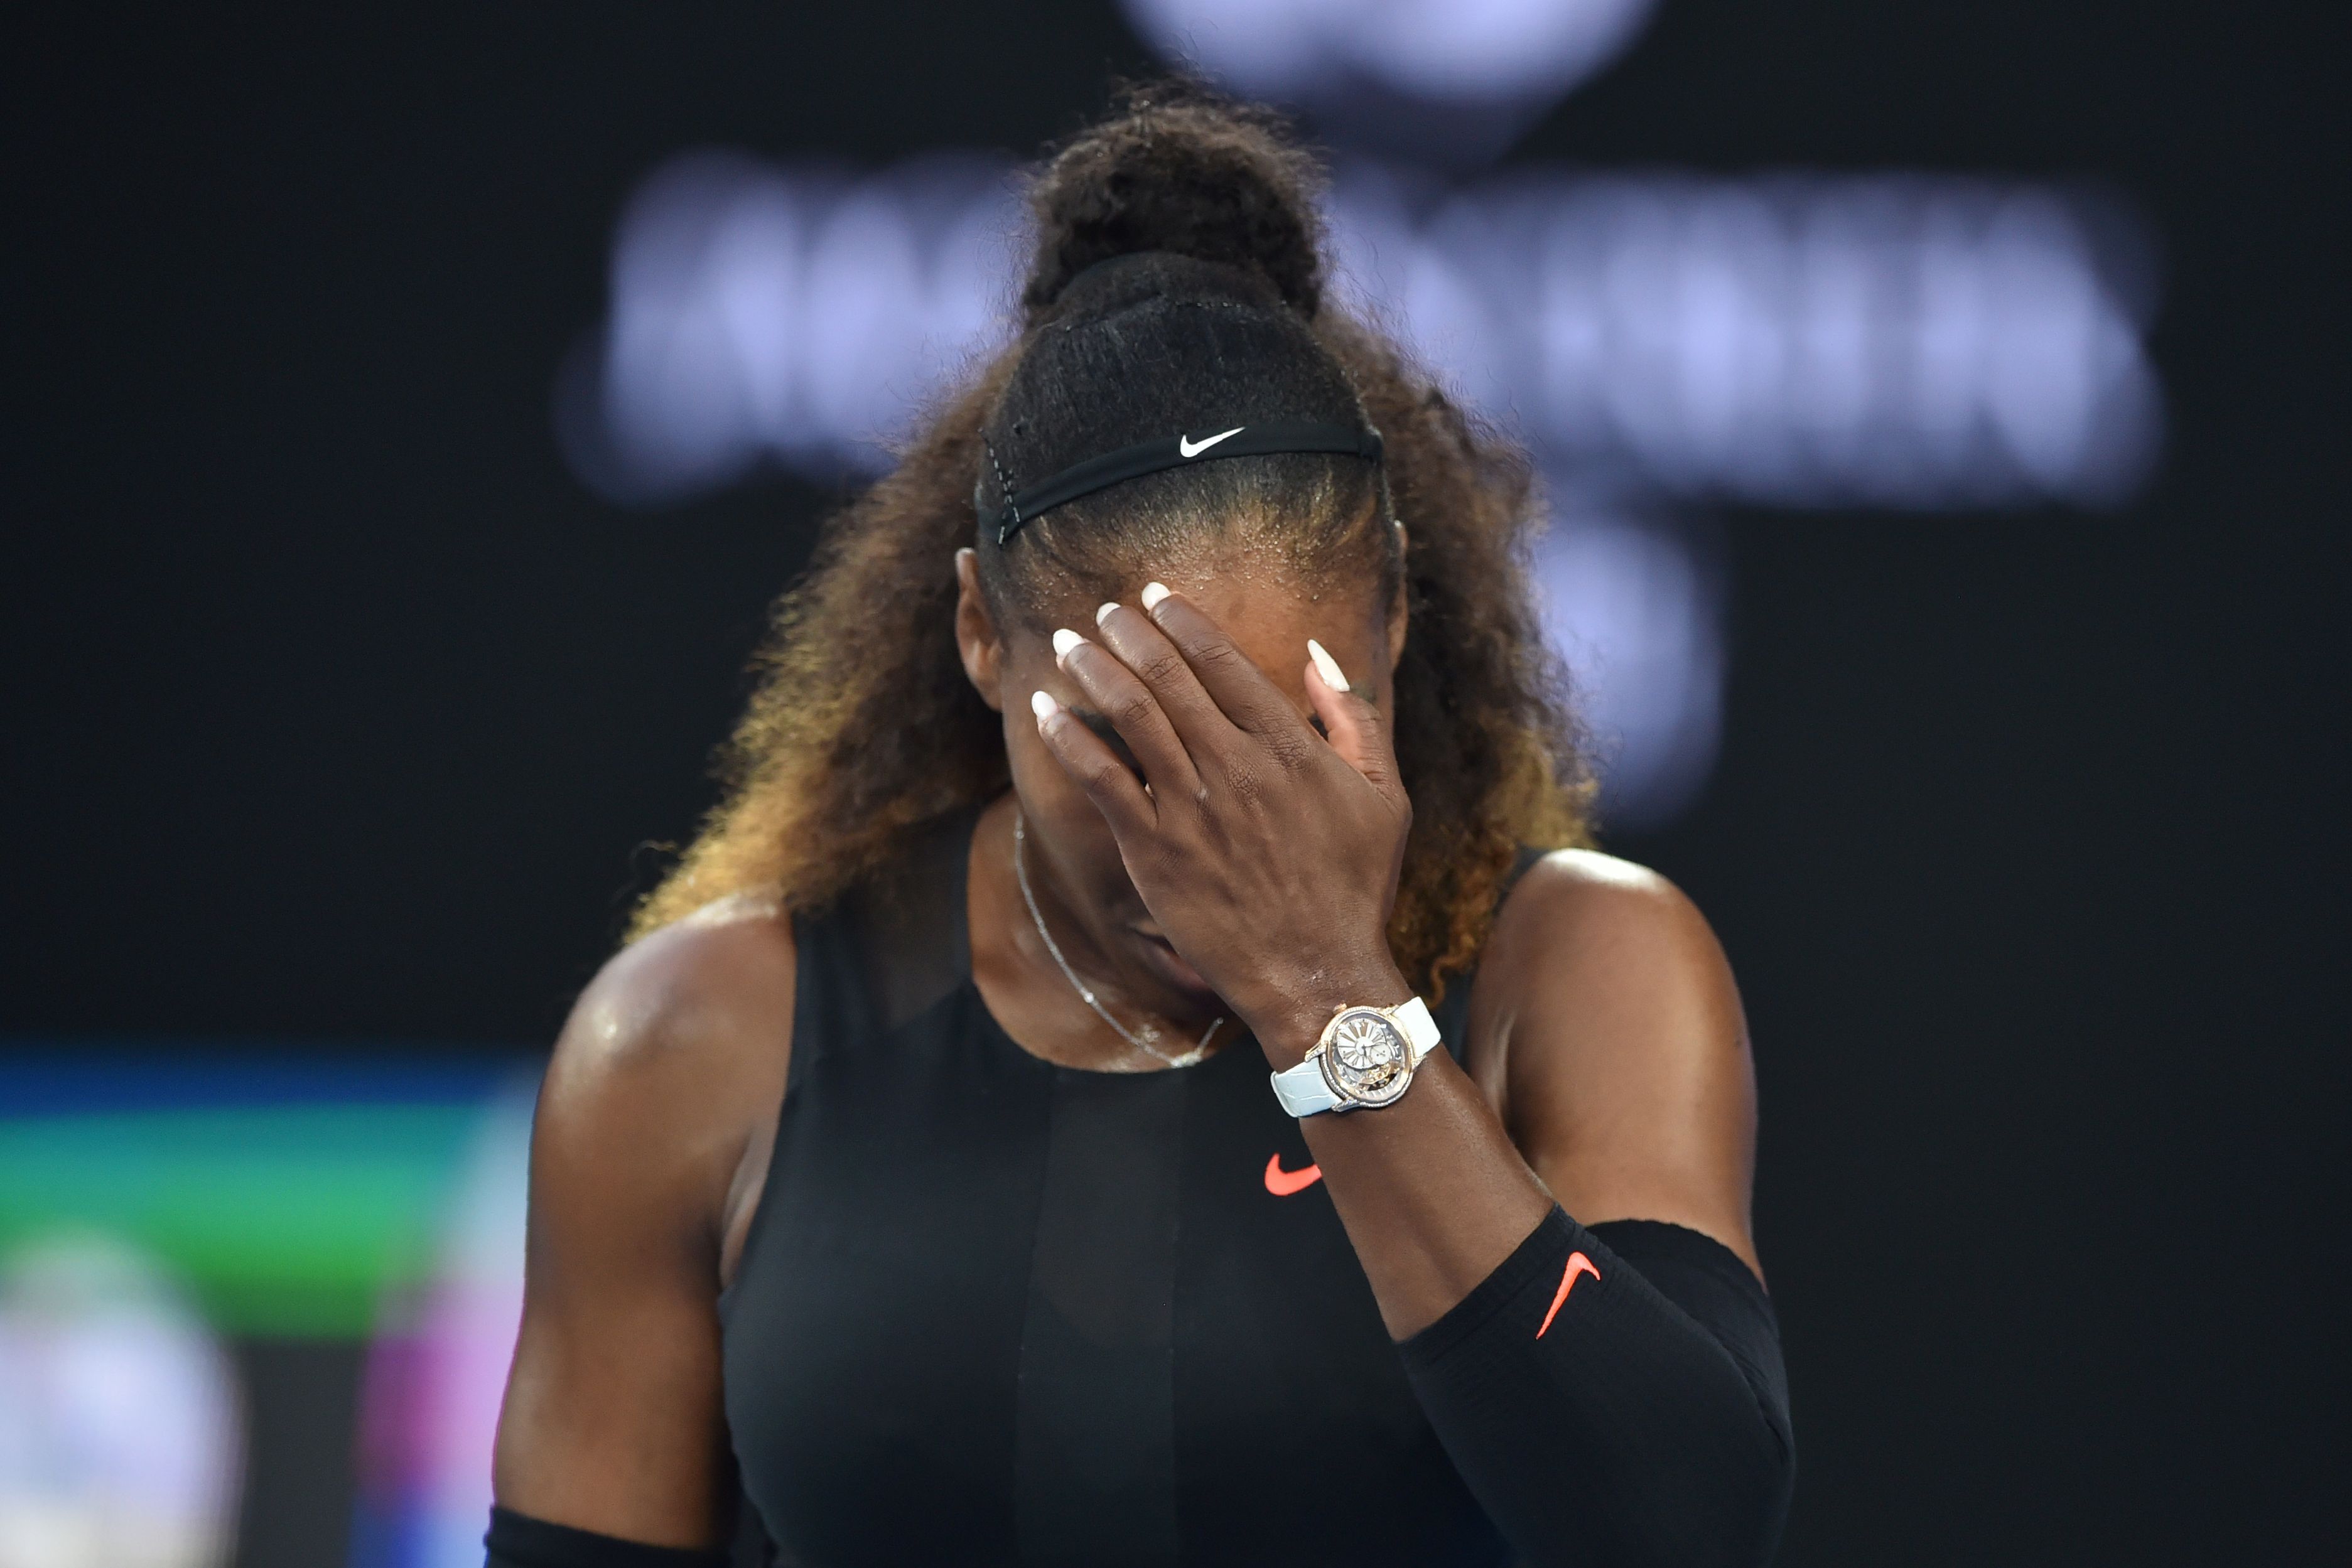 Racist Comment About Serena Williams Gets Buffalo Radio Host ‘Swiftly Terminated’